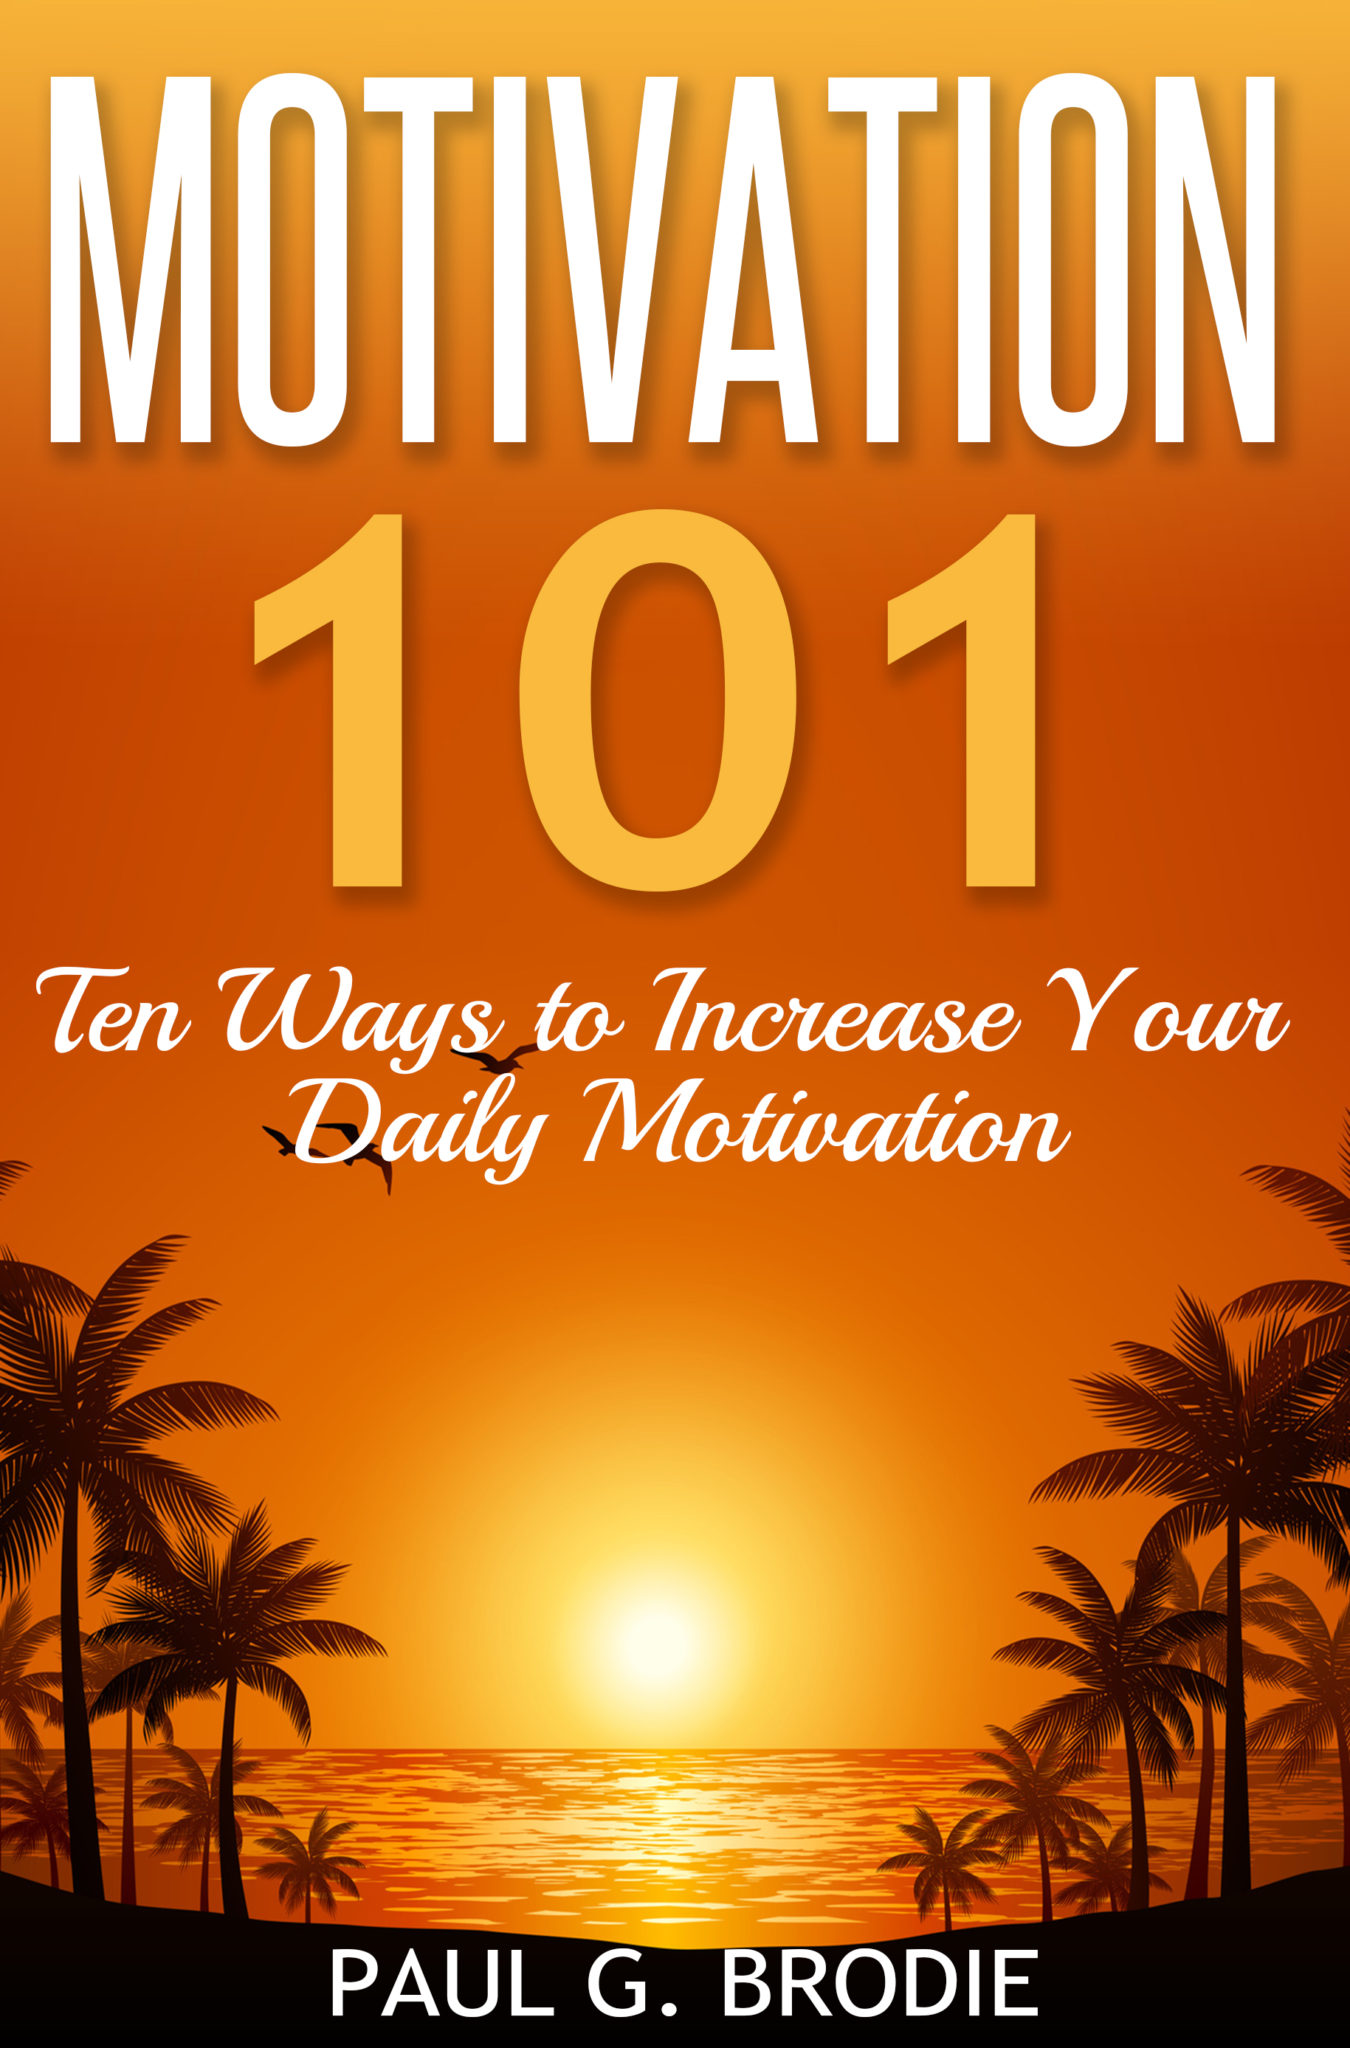 FREE: Motivation 101: Ten Ways to Increase Your Daily Motivation by Paul G. Brodie